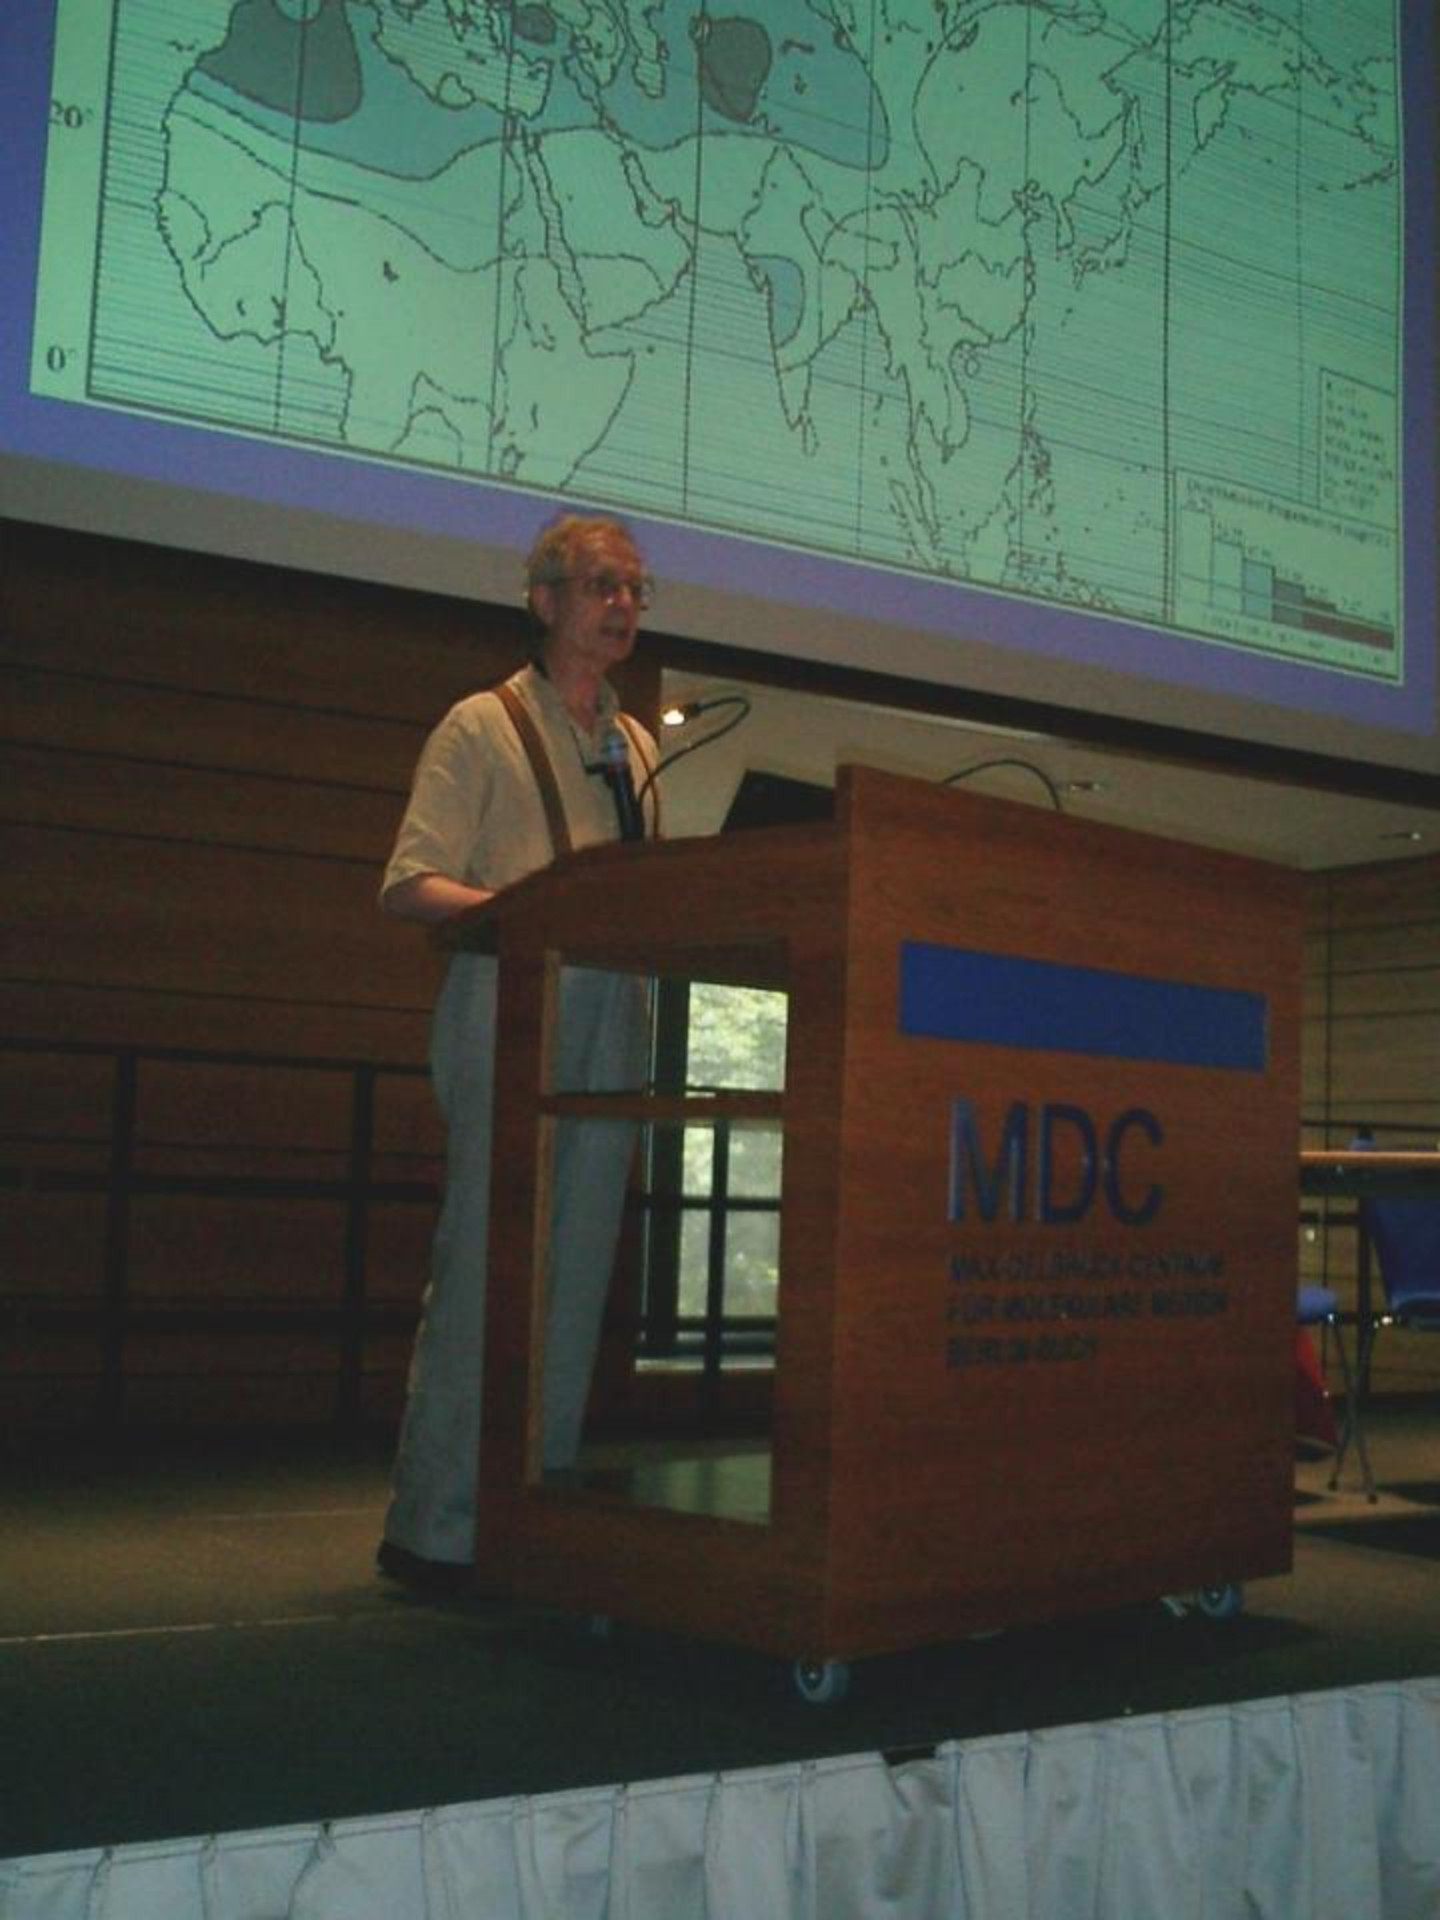 A special guest lecture was given by Jürg Ott (The Rockefeller University).